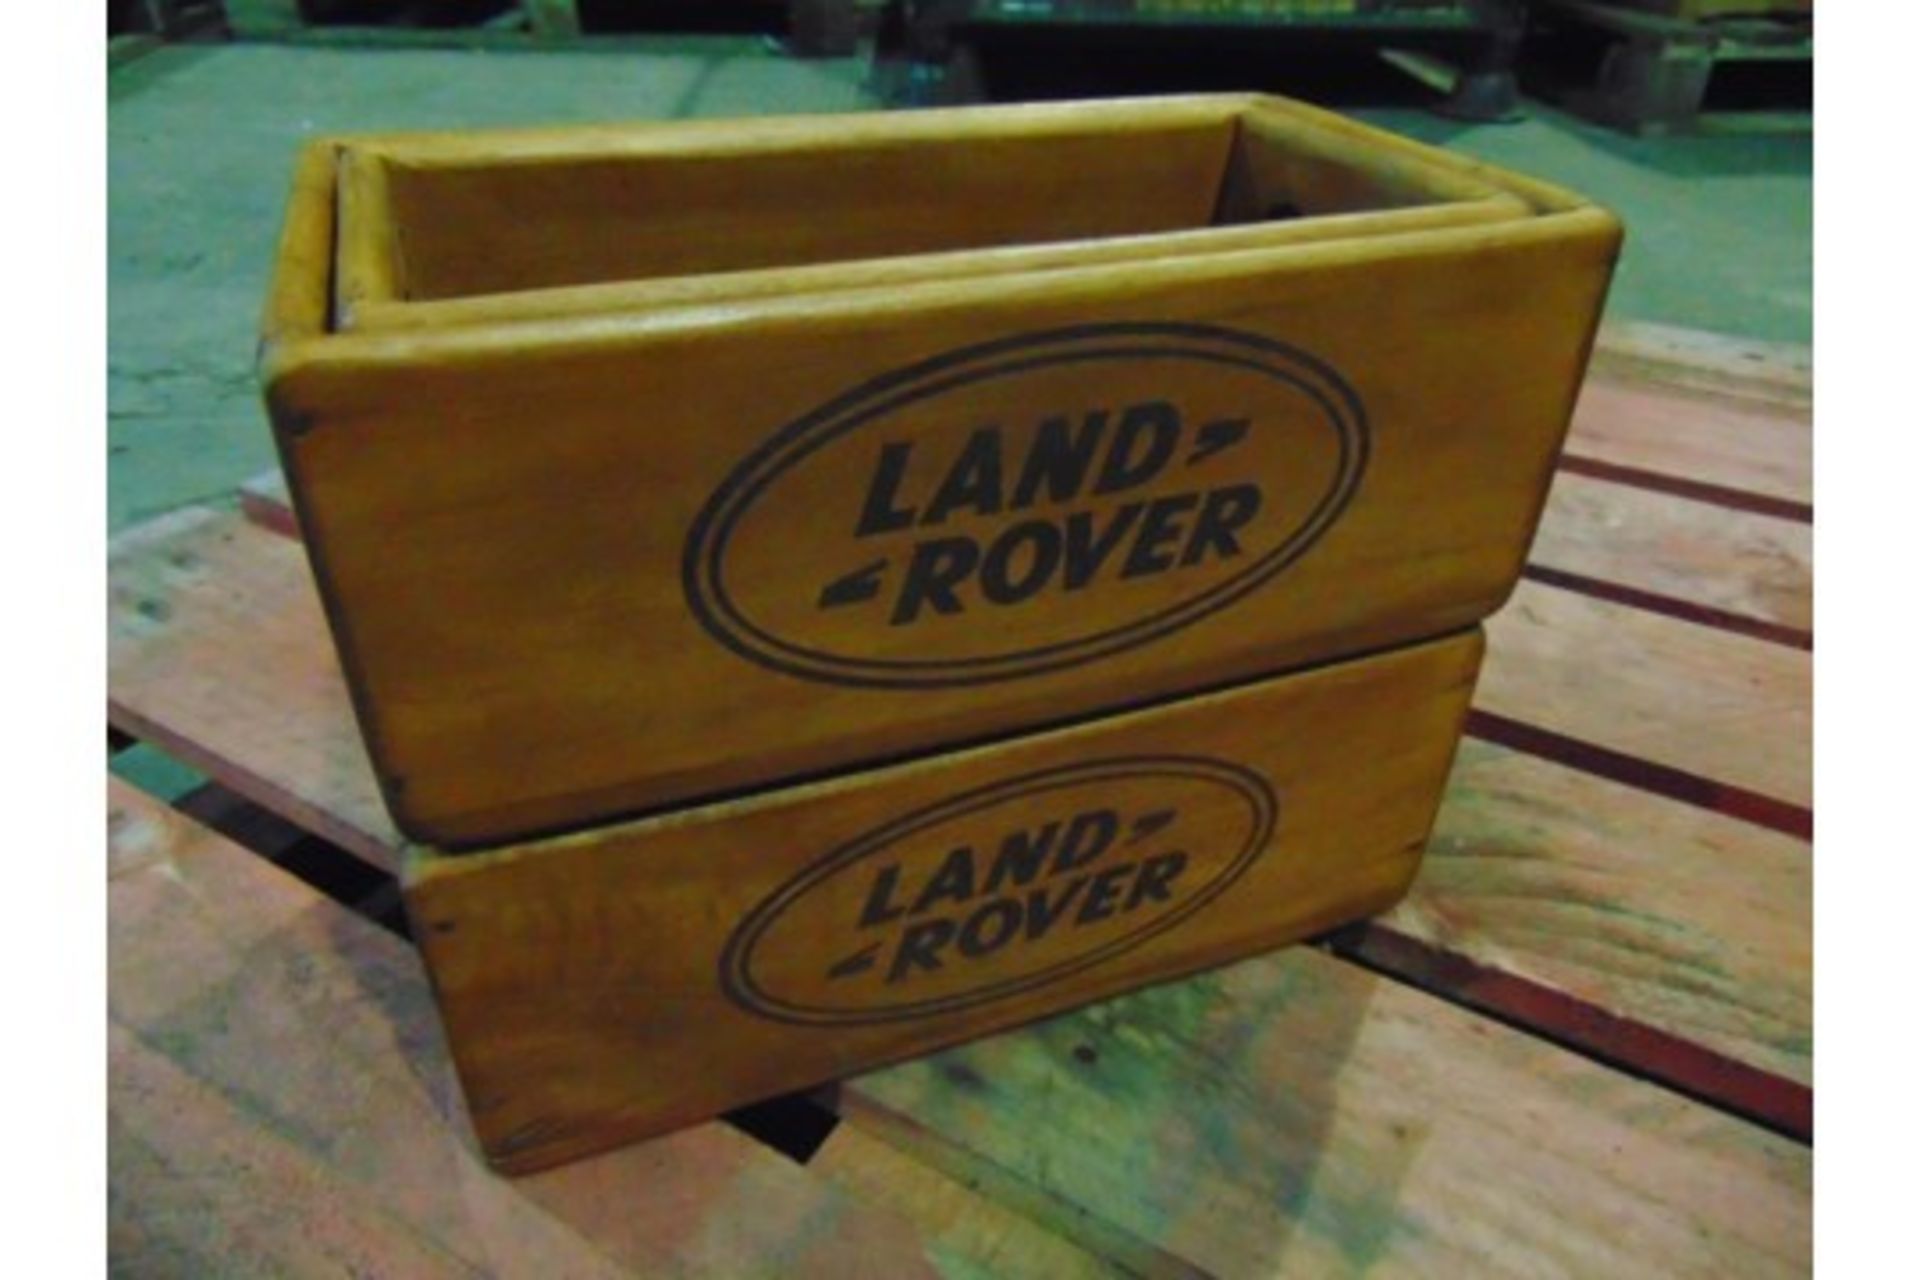 4 x Land Rover Wooden Display / Storage Boxes - Image 4 of 5